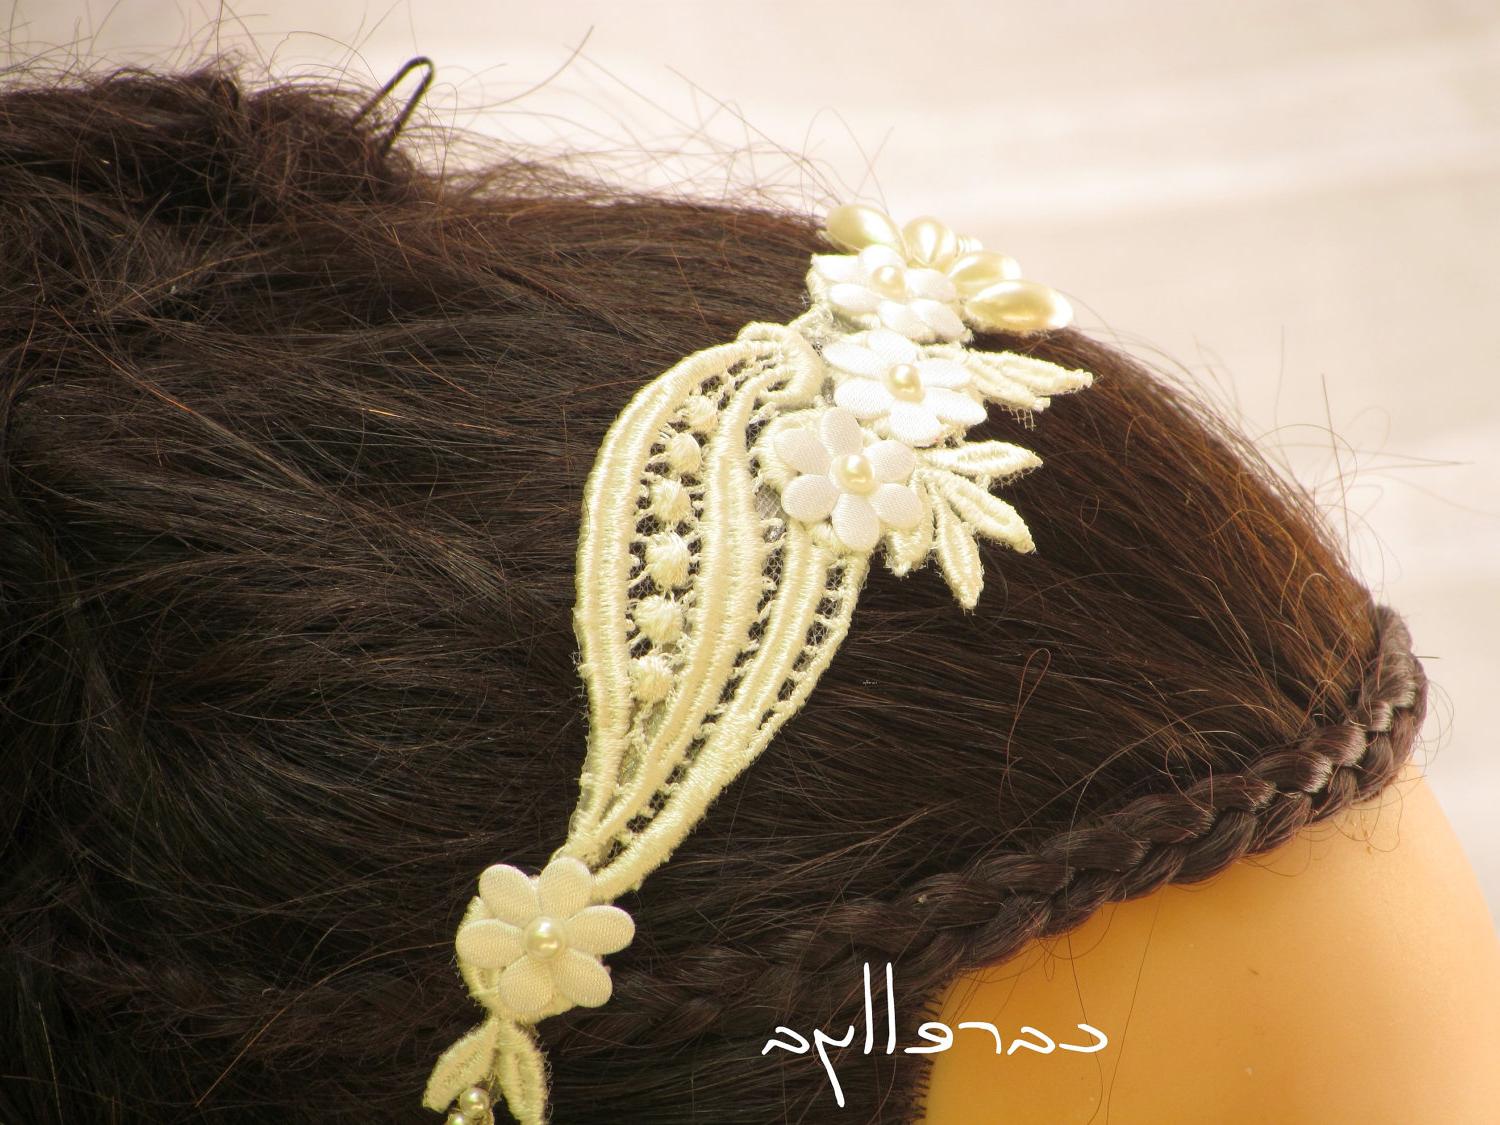 Bridal Lace Headband - Ivory Lace Headpiece With Pearls - Wedding Hair